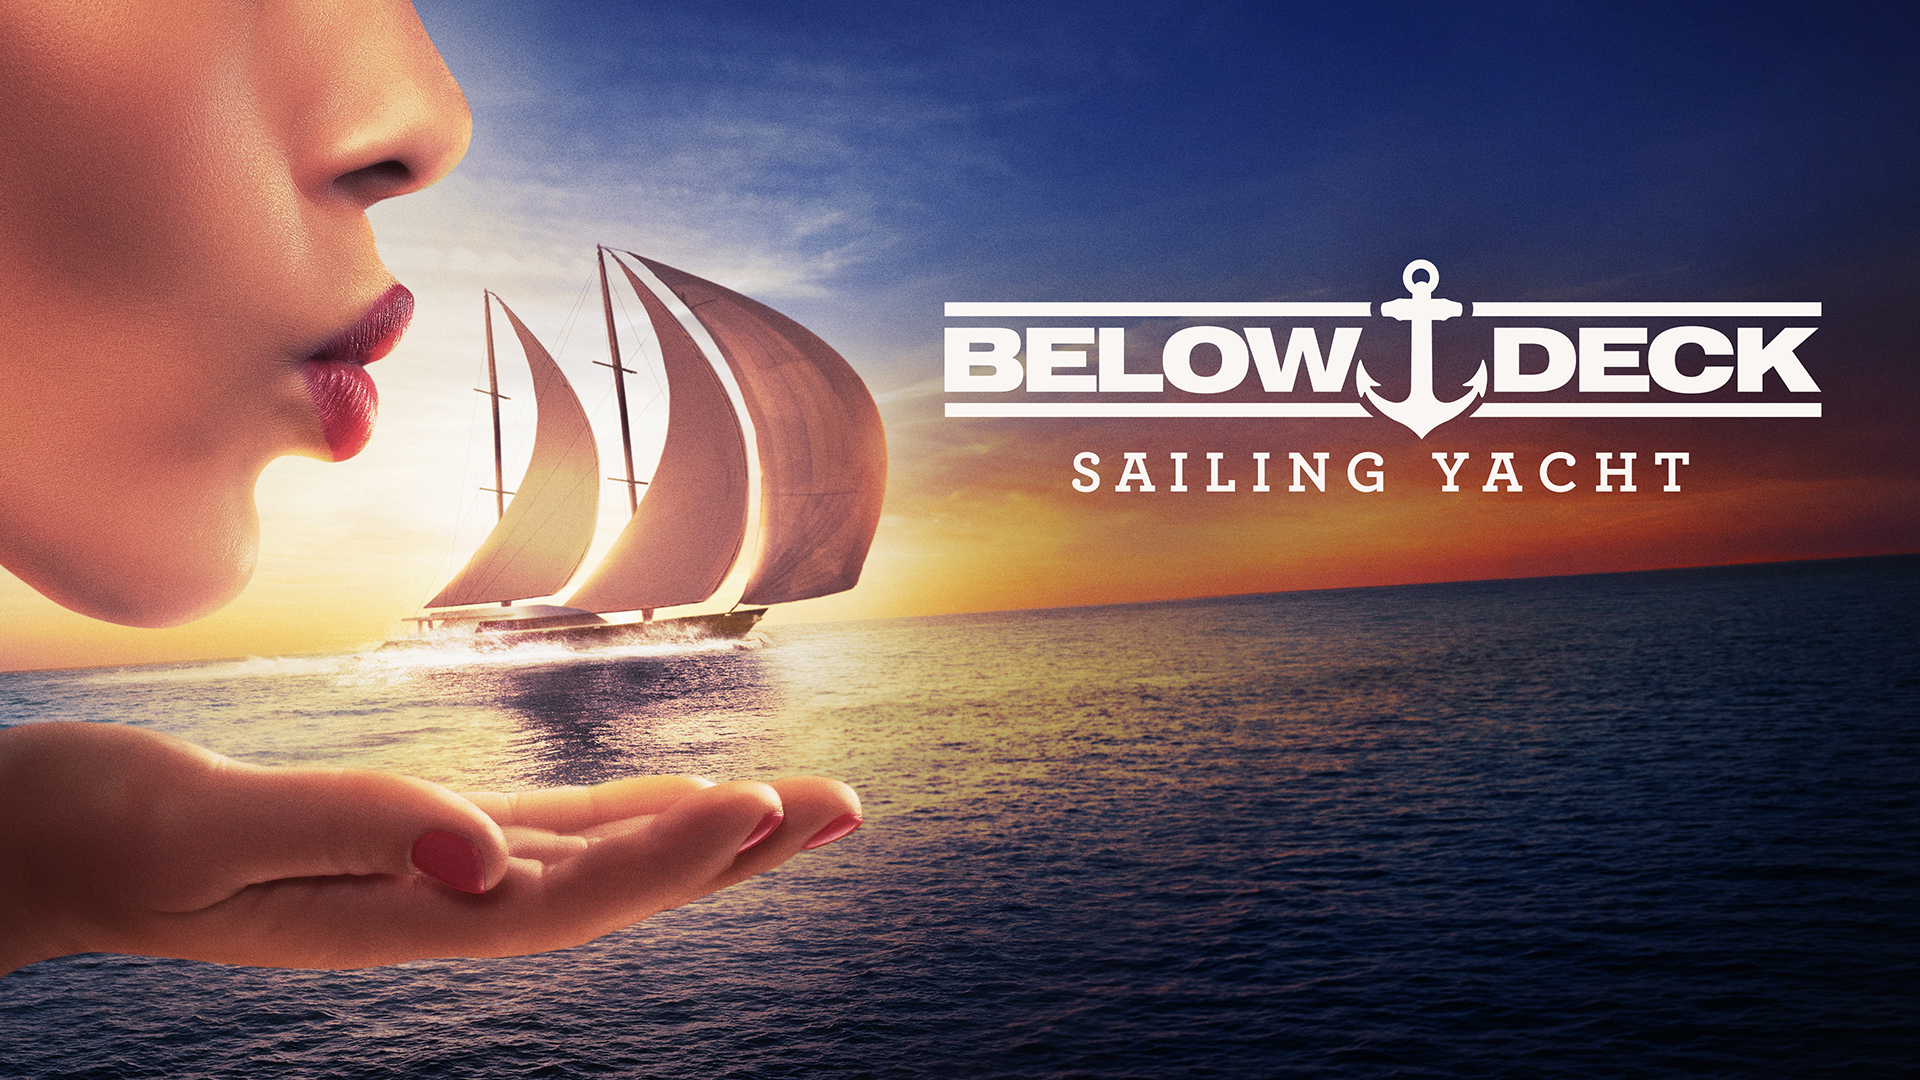 'Below Deck Sailing Yacht' - New Season April 10. Go to a video page.